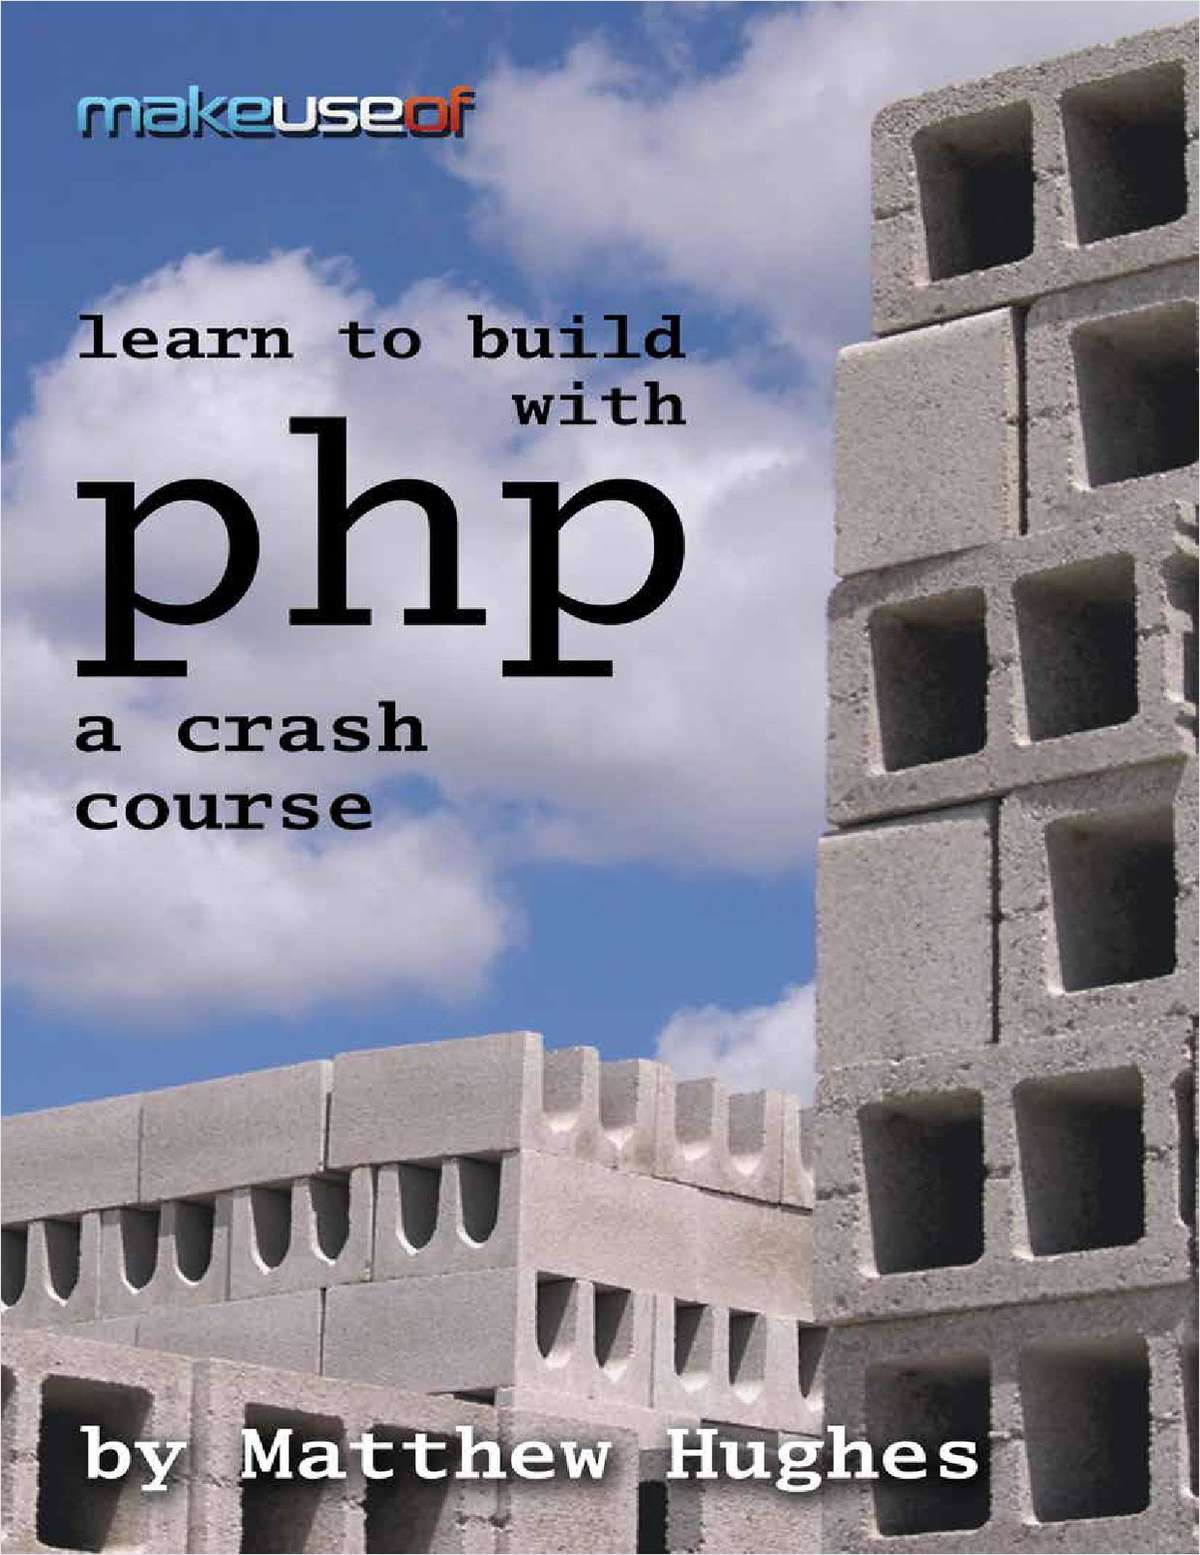 Learn to Build with PHP - A Crash Course